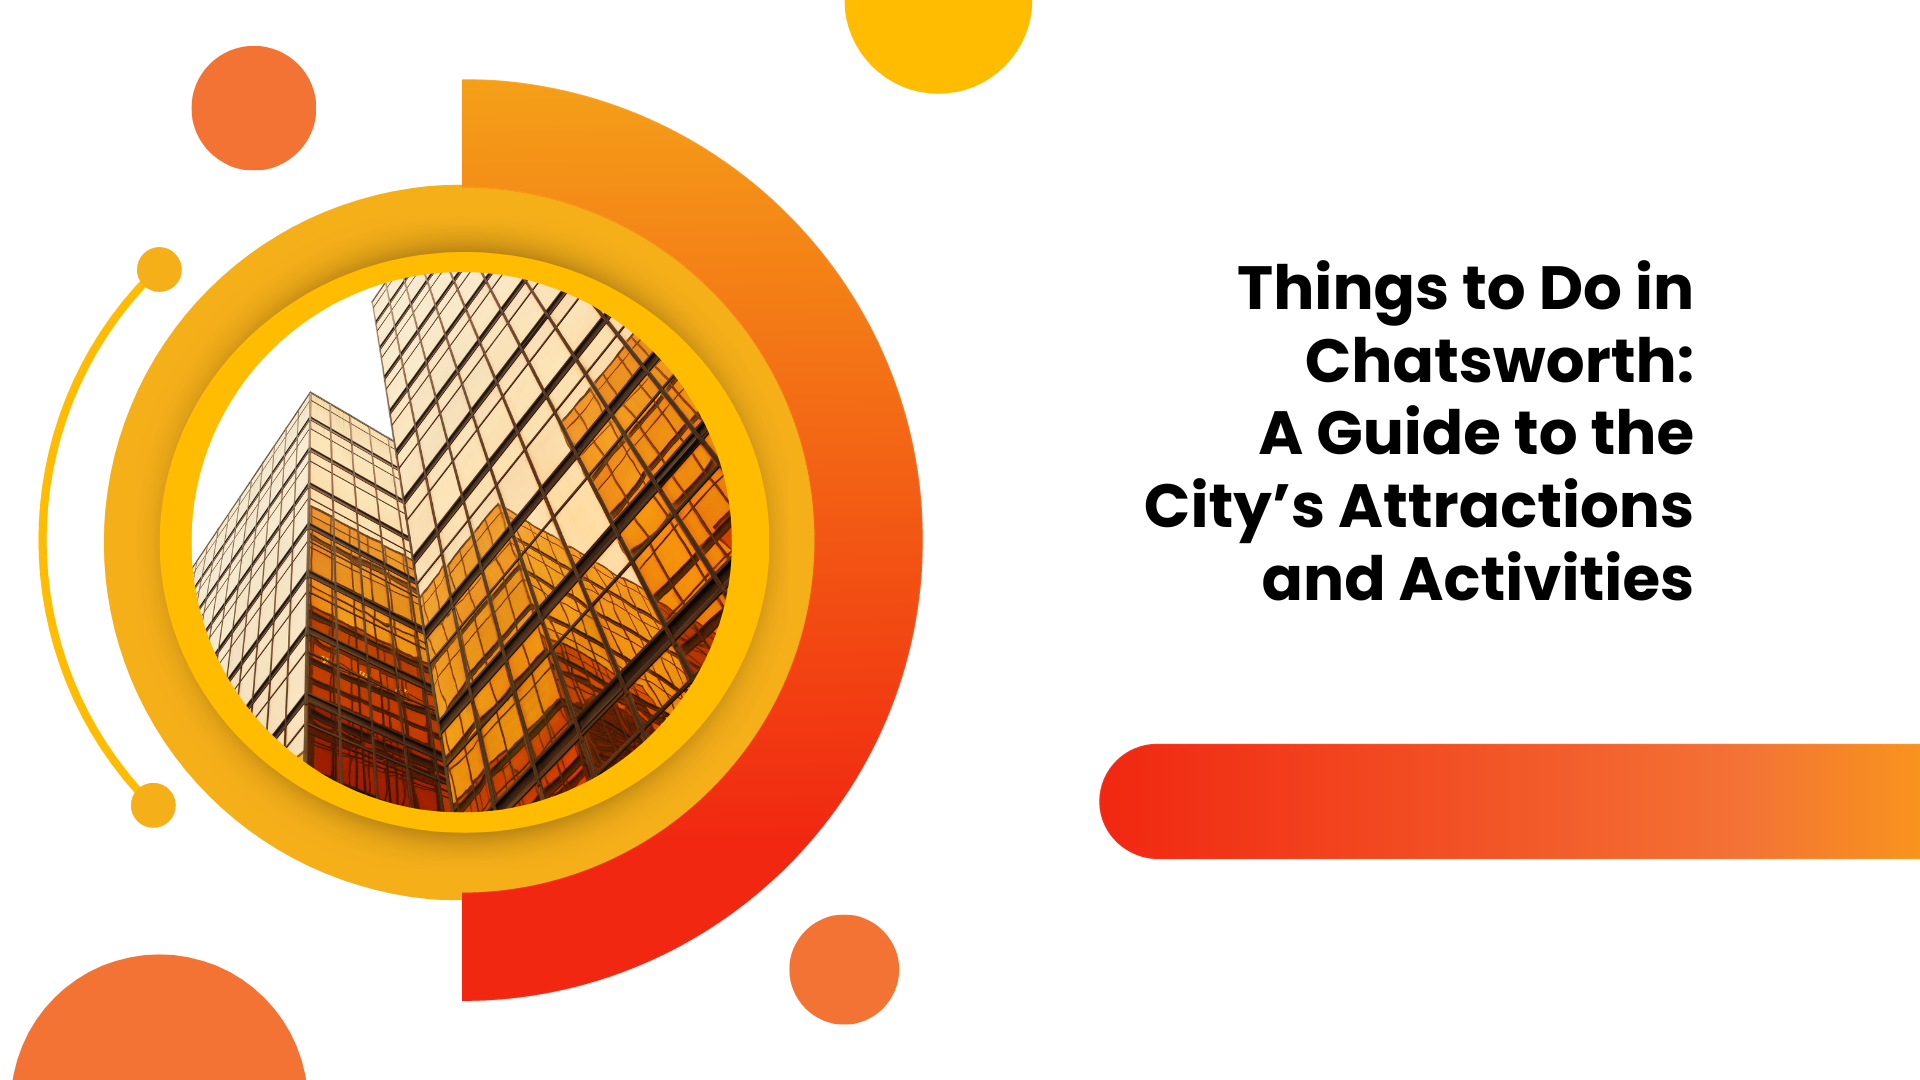 Things to Do in Chatsworth: A Guide to the City’s Attractions and Activities